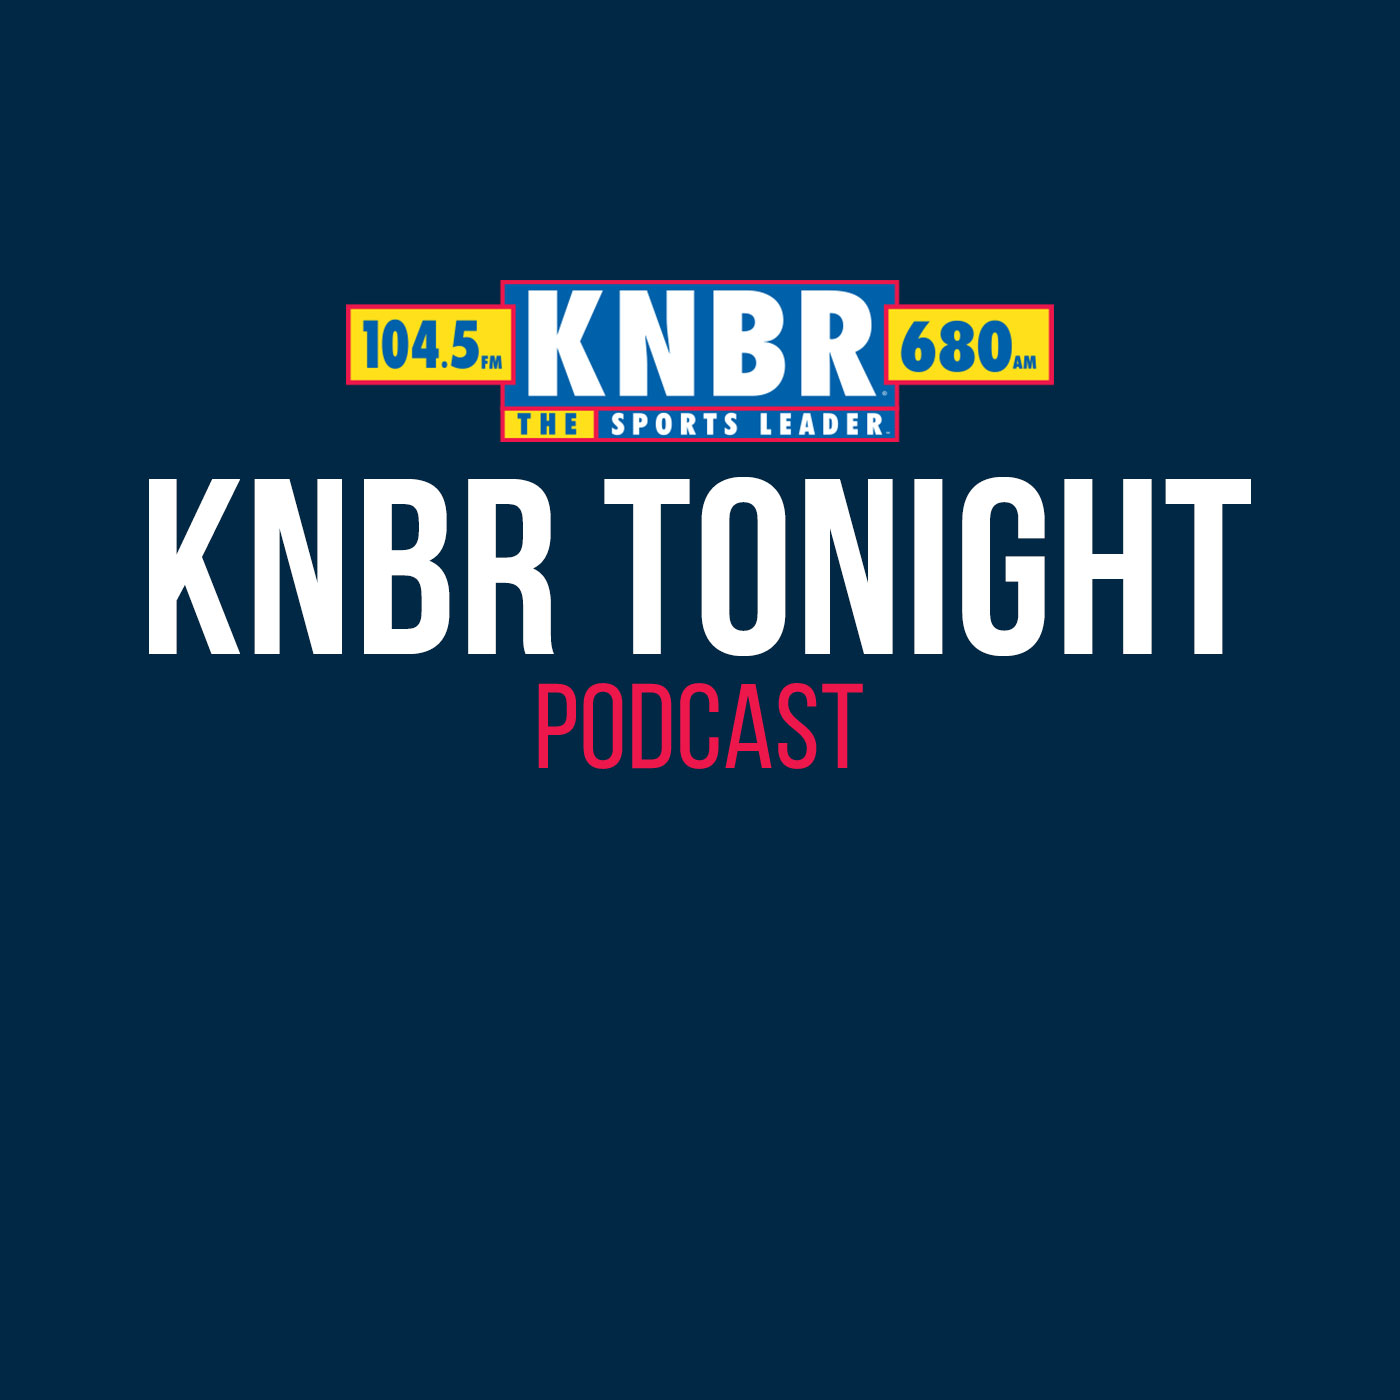 11-27 Tracy Sandler joins KNBR Tonight with FP to breakdown 49ers victory vs the Seahawks and preview 49ers/Eagles matchup on Sunday